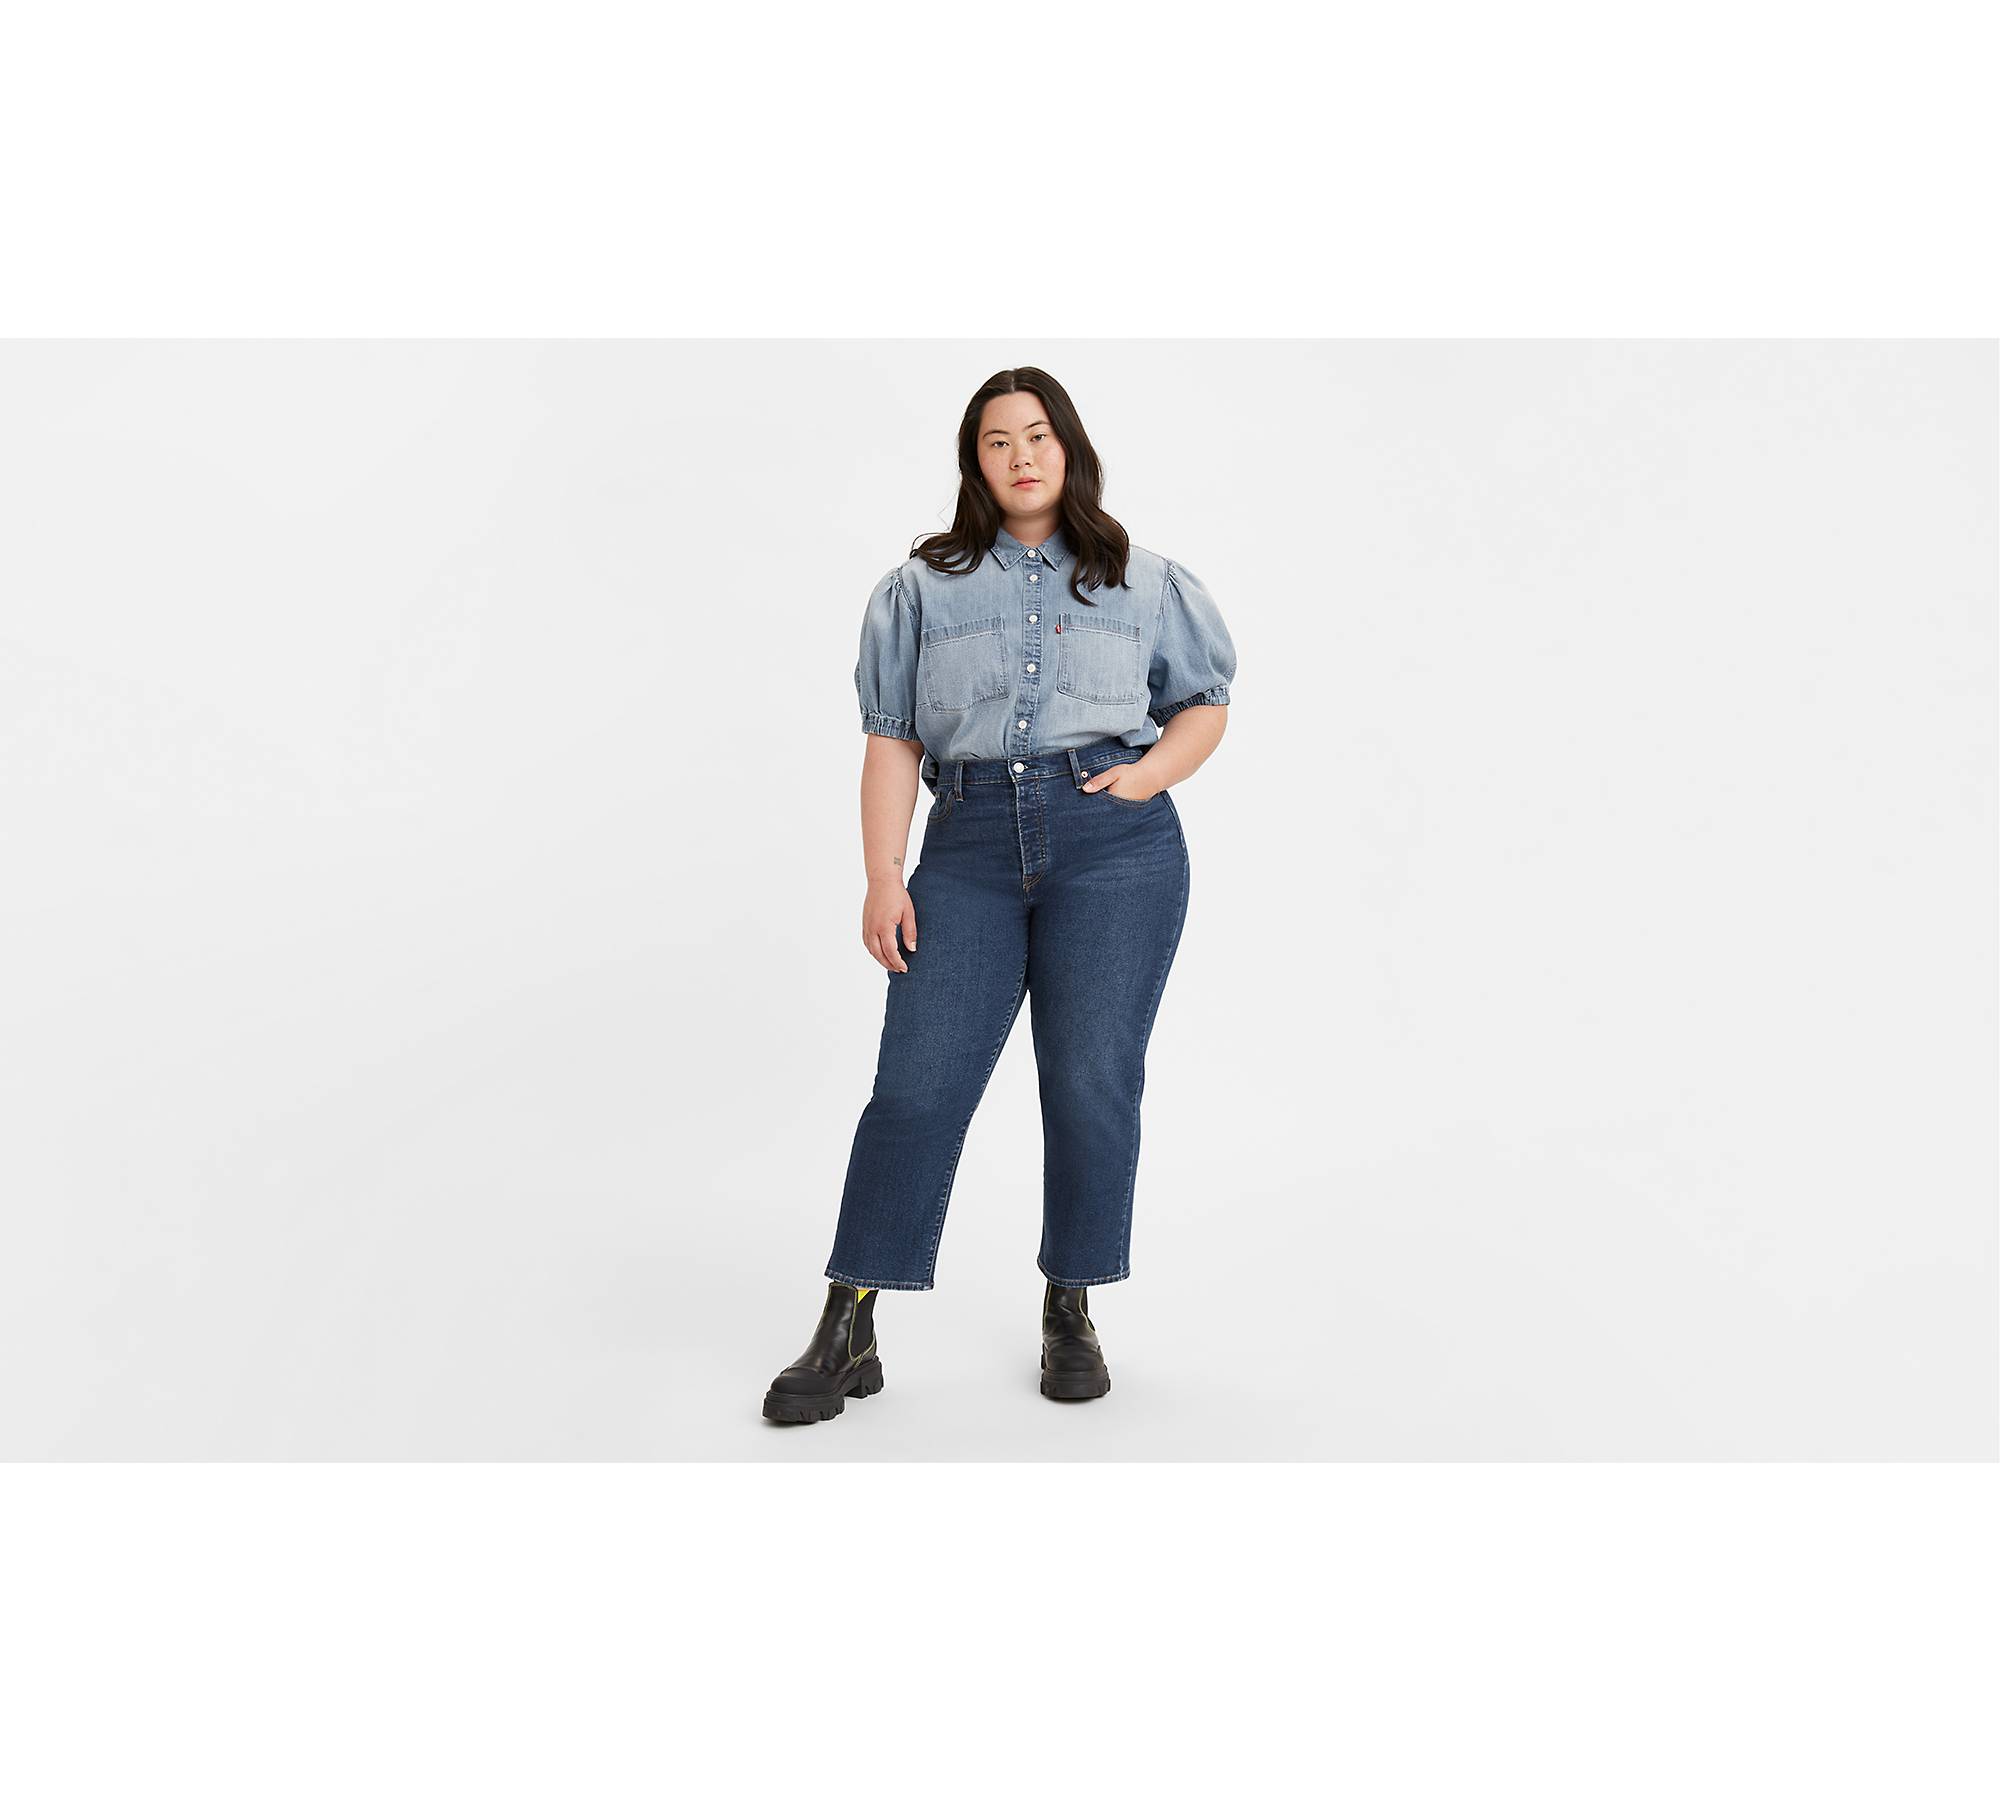 Women's High-rise Relaxed Fit Full Length Baggy Wide Leg Trousers - A New  Day™ Blue 14 : Target